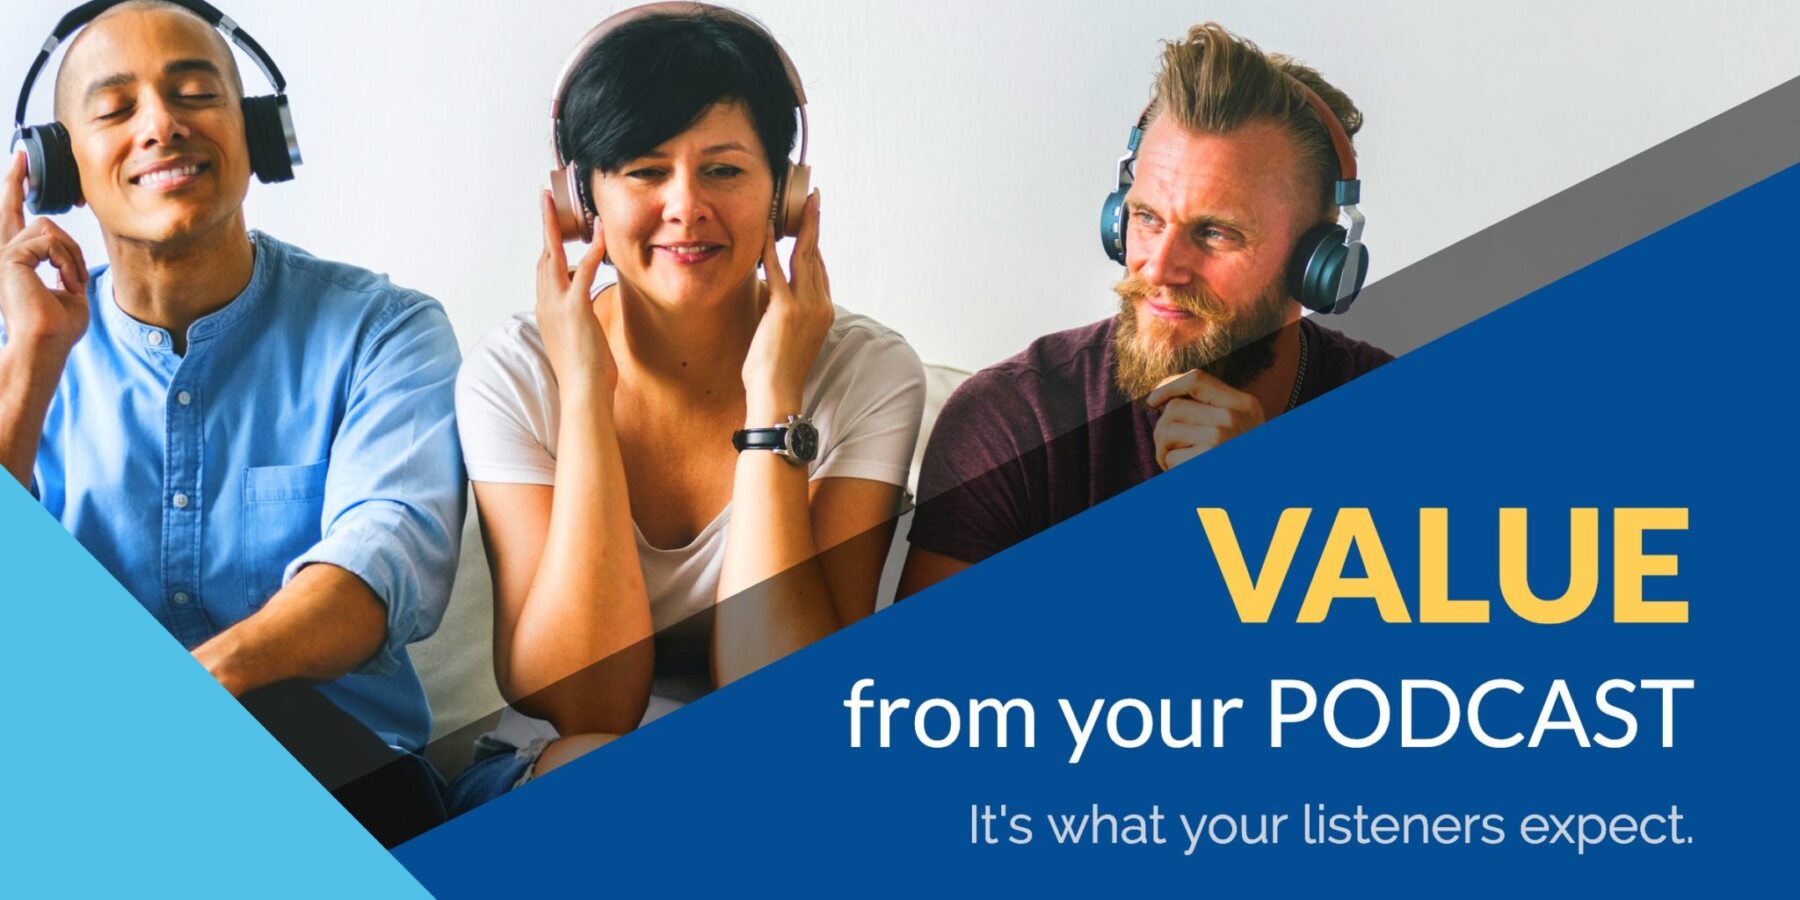 Association Podcasts: 5 Awesome Ways to Create Value